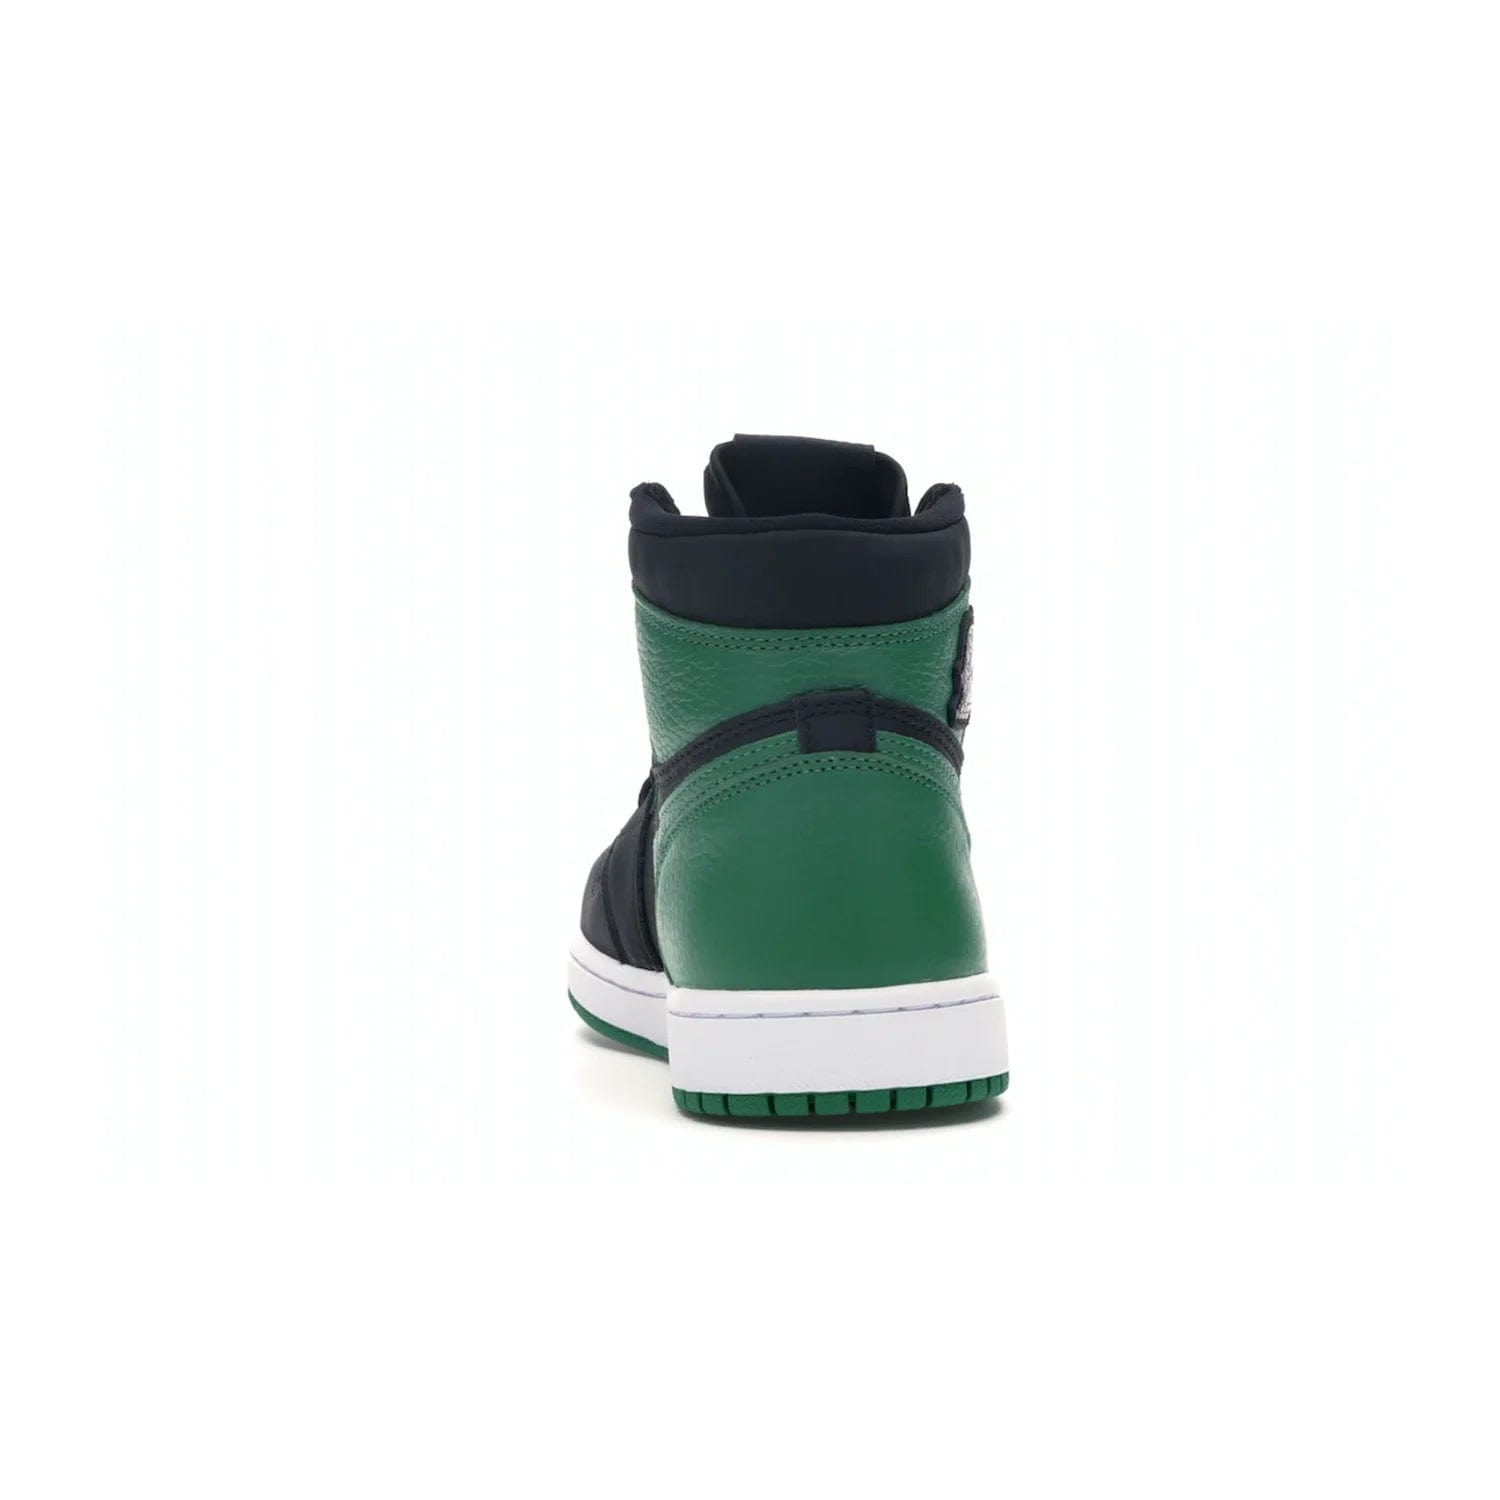 Jordan 1 Retro High Pine Green Black - Image 27 - Only at www.BallersClubKickz.com - Step into fresh style with the Jordan 1 Retro High Pine Green Black. Combining a black tumbled leather upper with green leather overlays, this sneaker features a Gym Red embroidered tongue tag, sail midsole, and pine green outsole for iconic style with a unique twist.